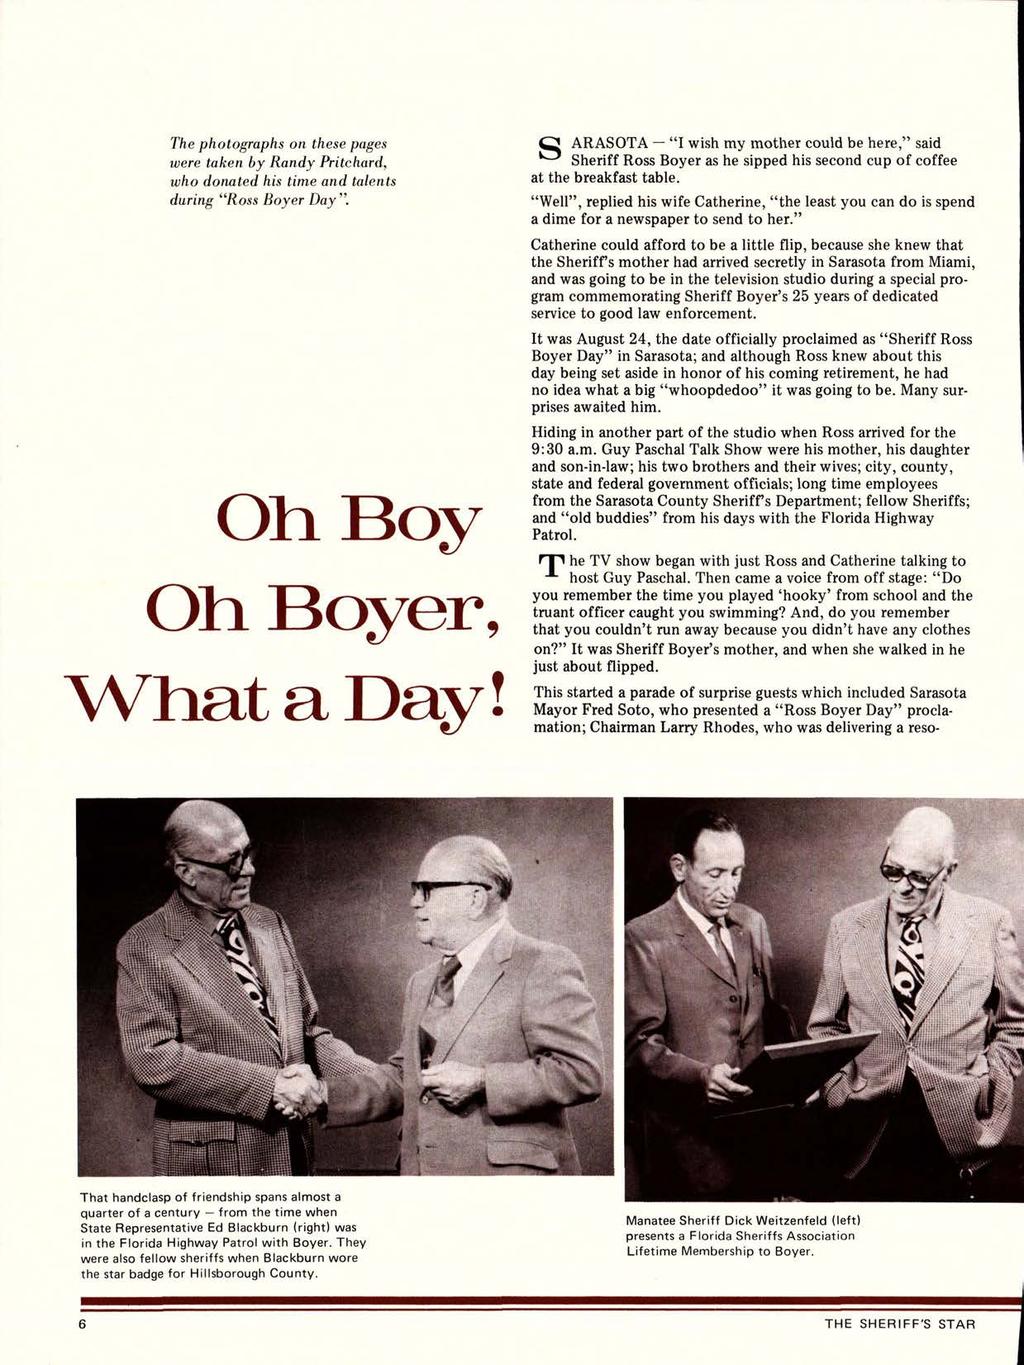 The photographs on these pages were taken by Randy Pritchard, who donated his time and talents during Ross Boyer Day. Oh. Boy Oh. Boyer, ~h.at a Day.